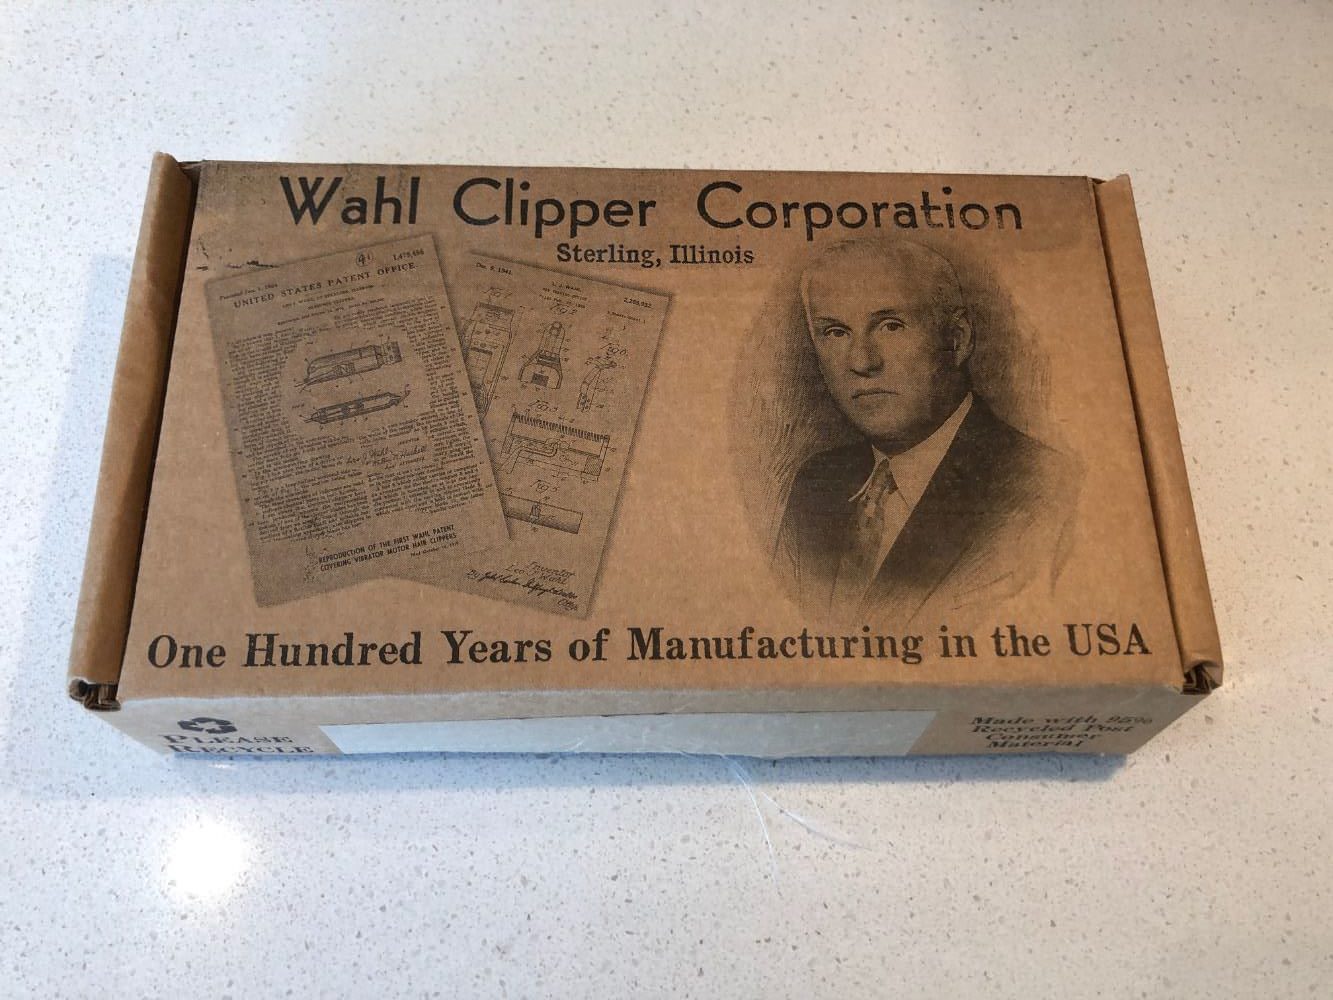 Wahl Clipper Corporation packaging